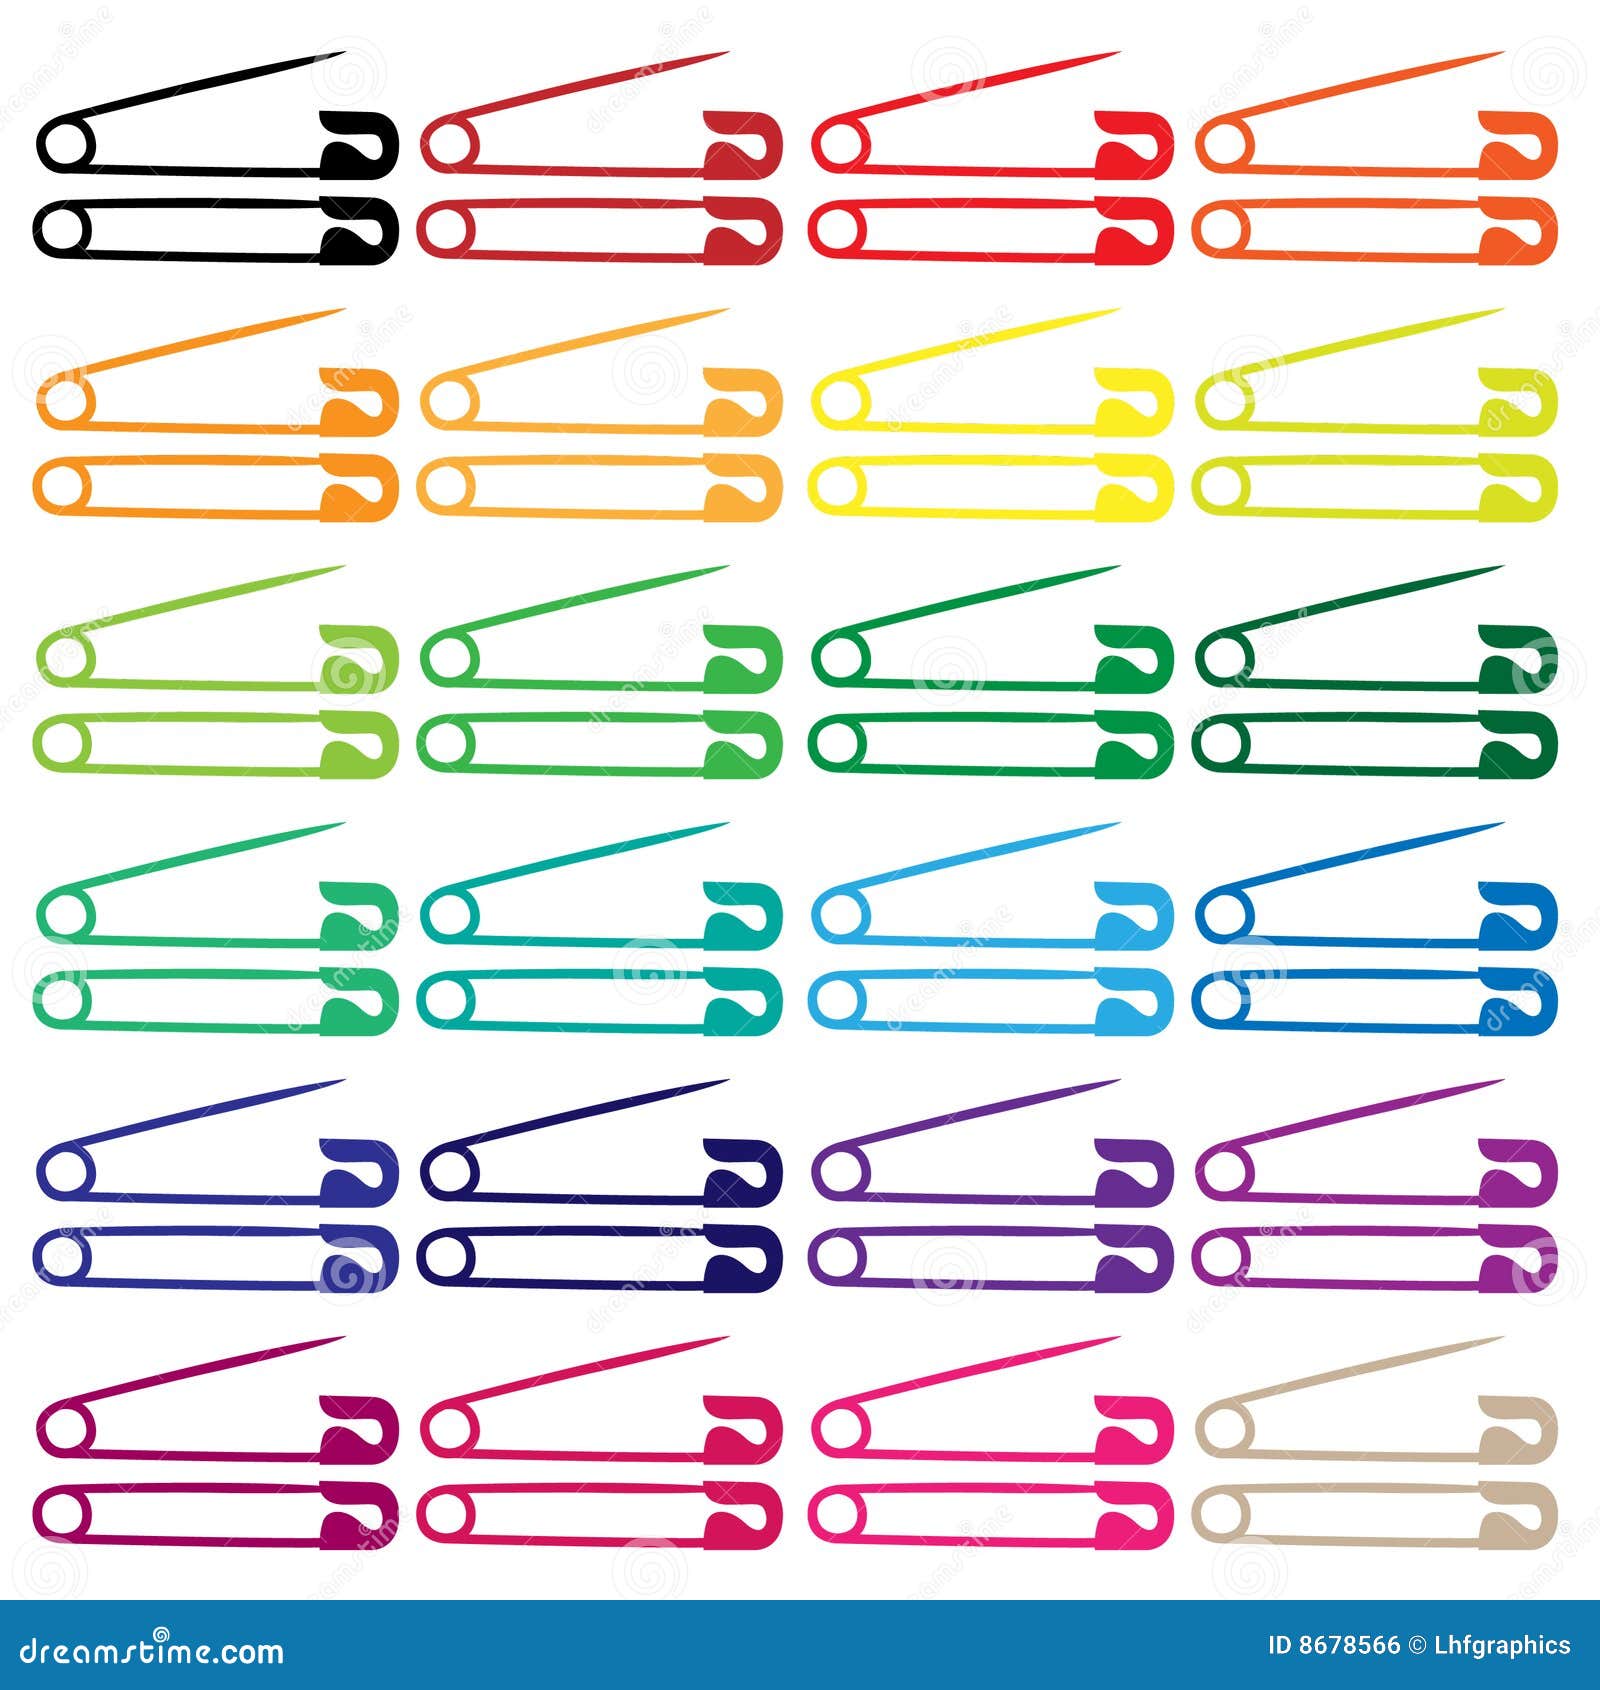 safety and diaper pins in colors - 